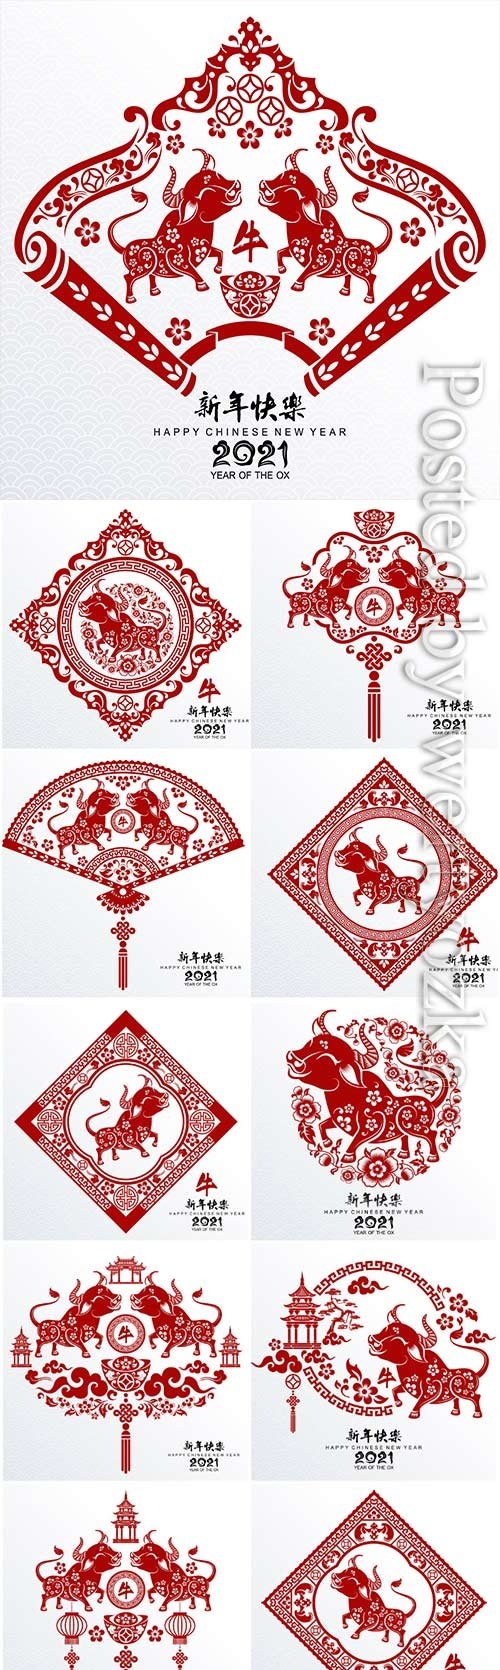 Chinese new year 2021, asian vector background